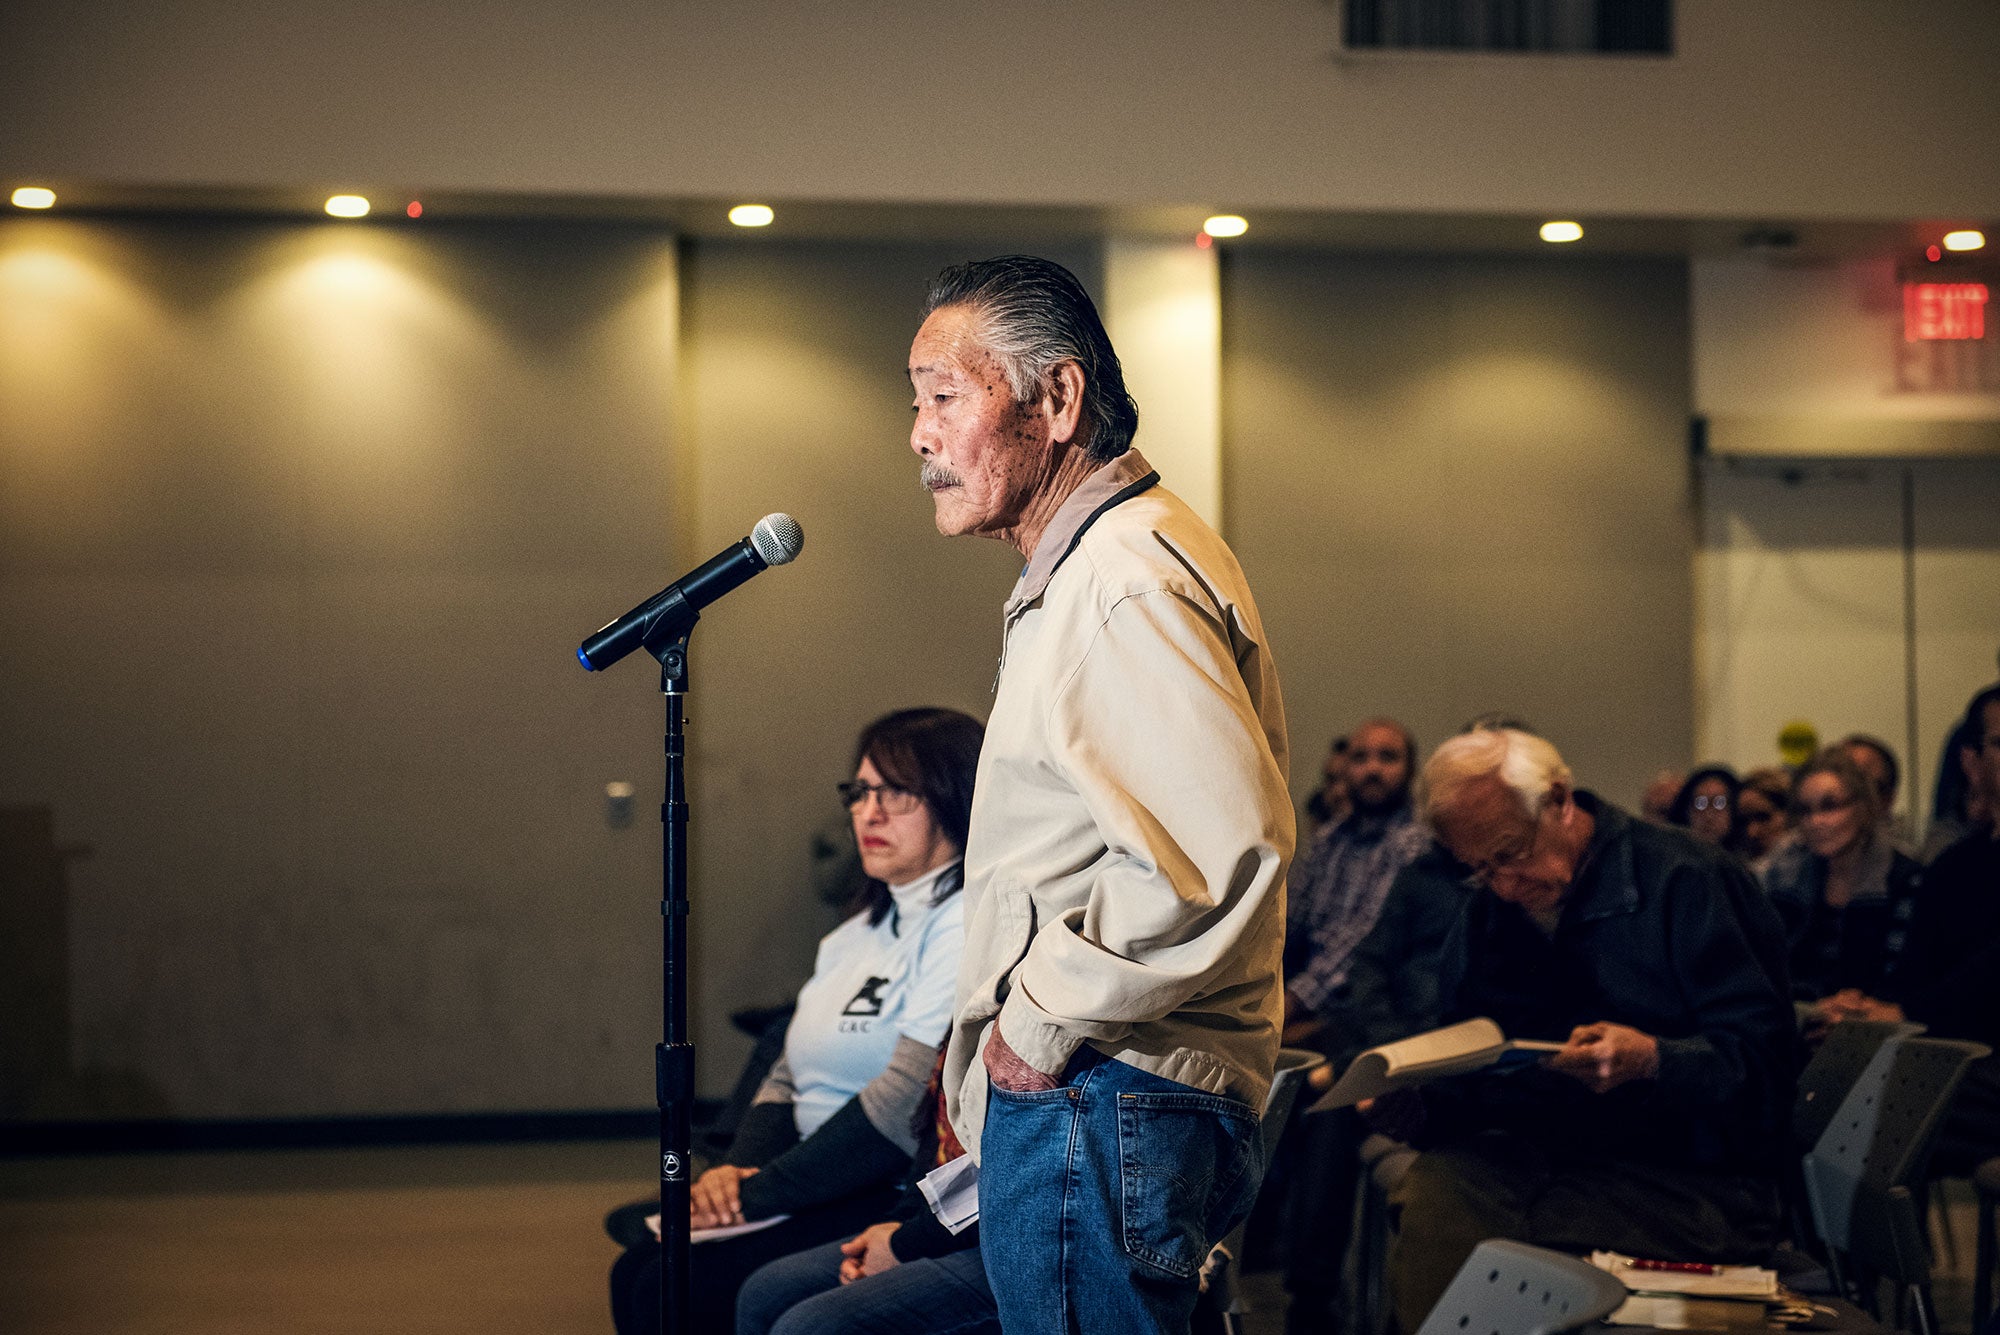 Kamimura speaks at a public hearing at the Hacienda Heights Community Center on Feb. 12, 2020.